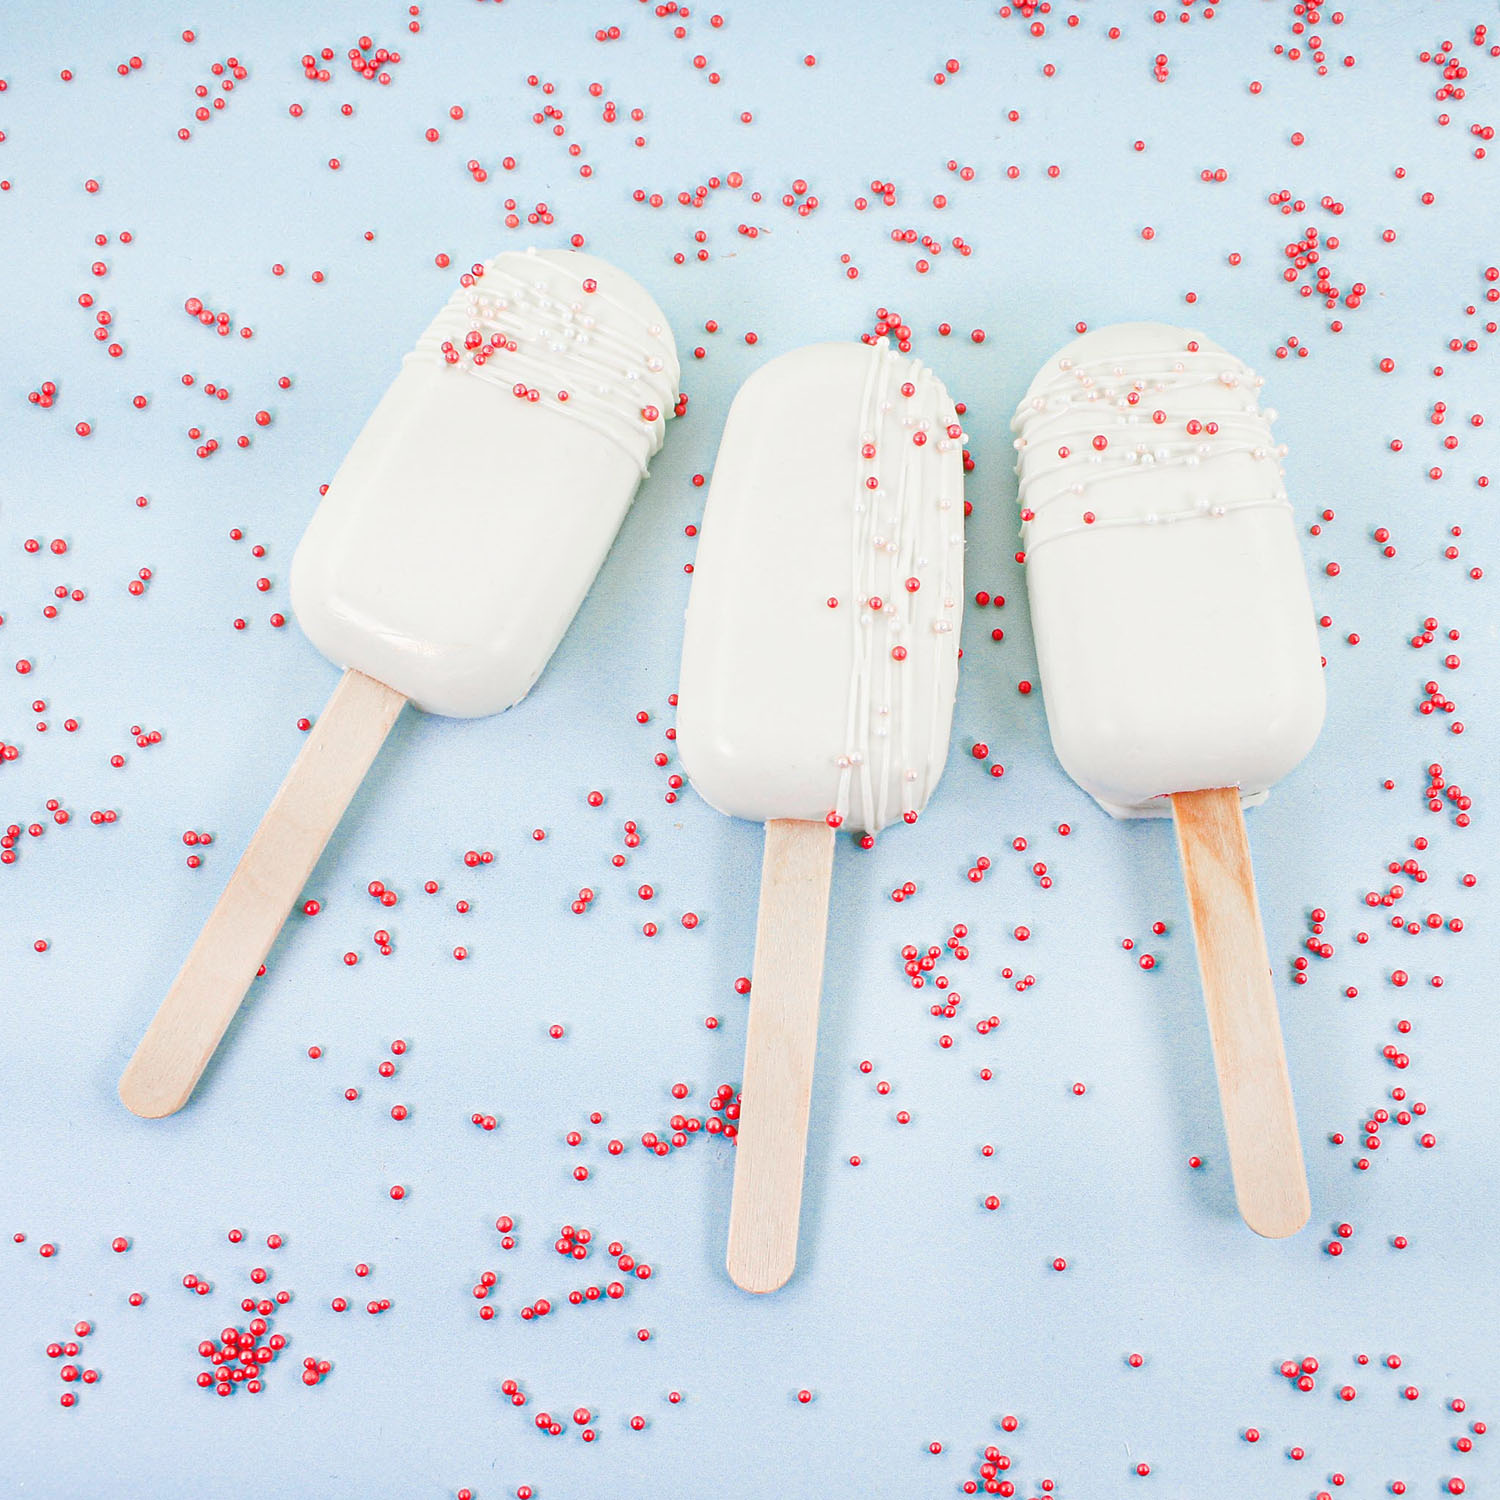 rose gold and white cakesicles for Valentines or Weddings